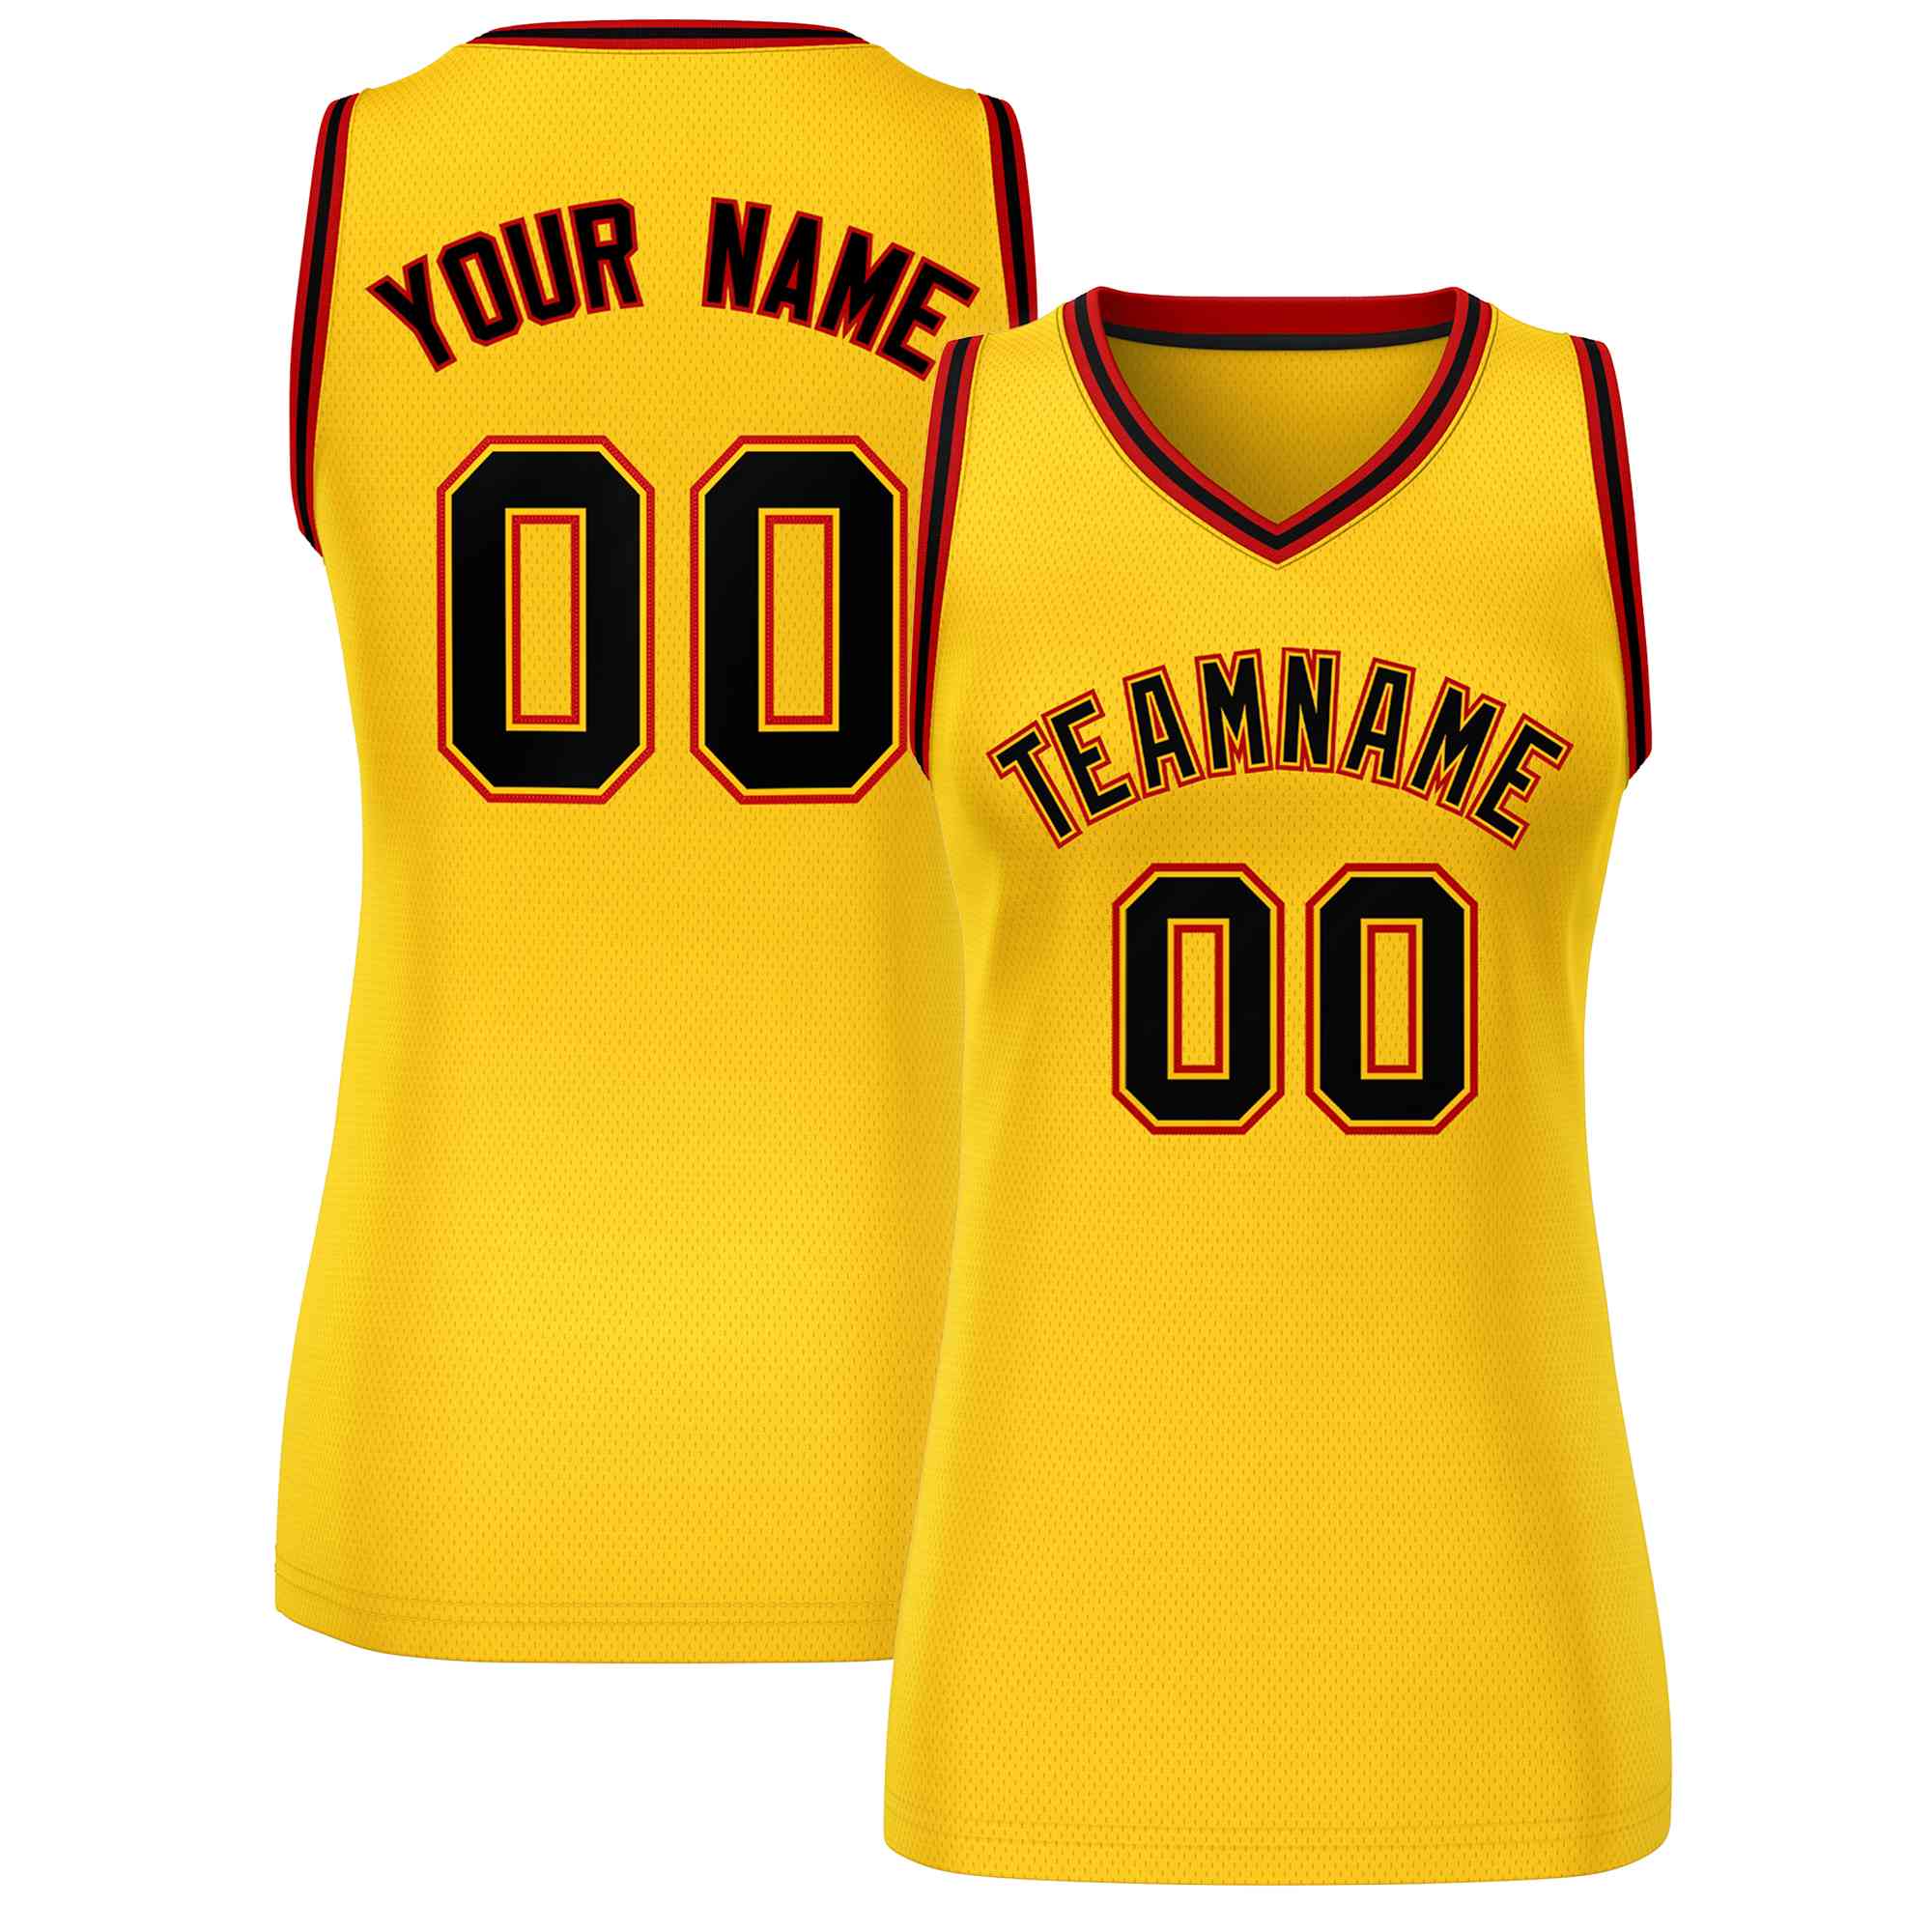 FANSIDEA Custom Basketball Jersey Yellow Brown-Cream Round Neck Sublimation Basketball Suit Jersey Men's Size:L